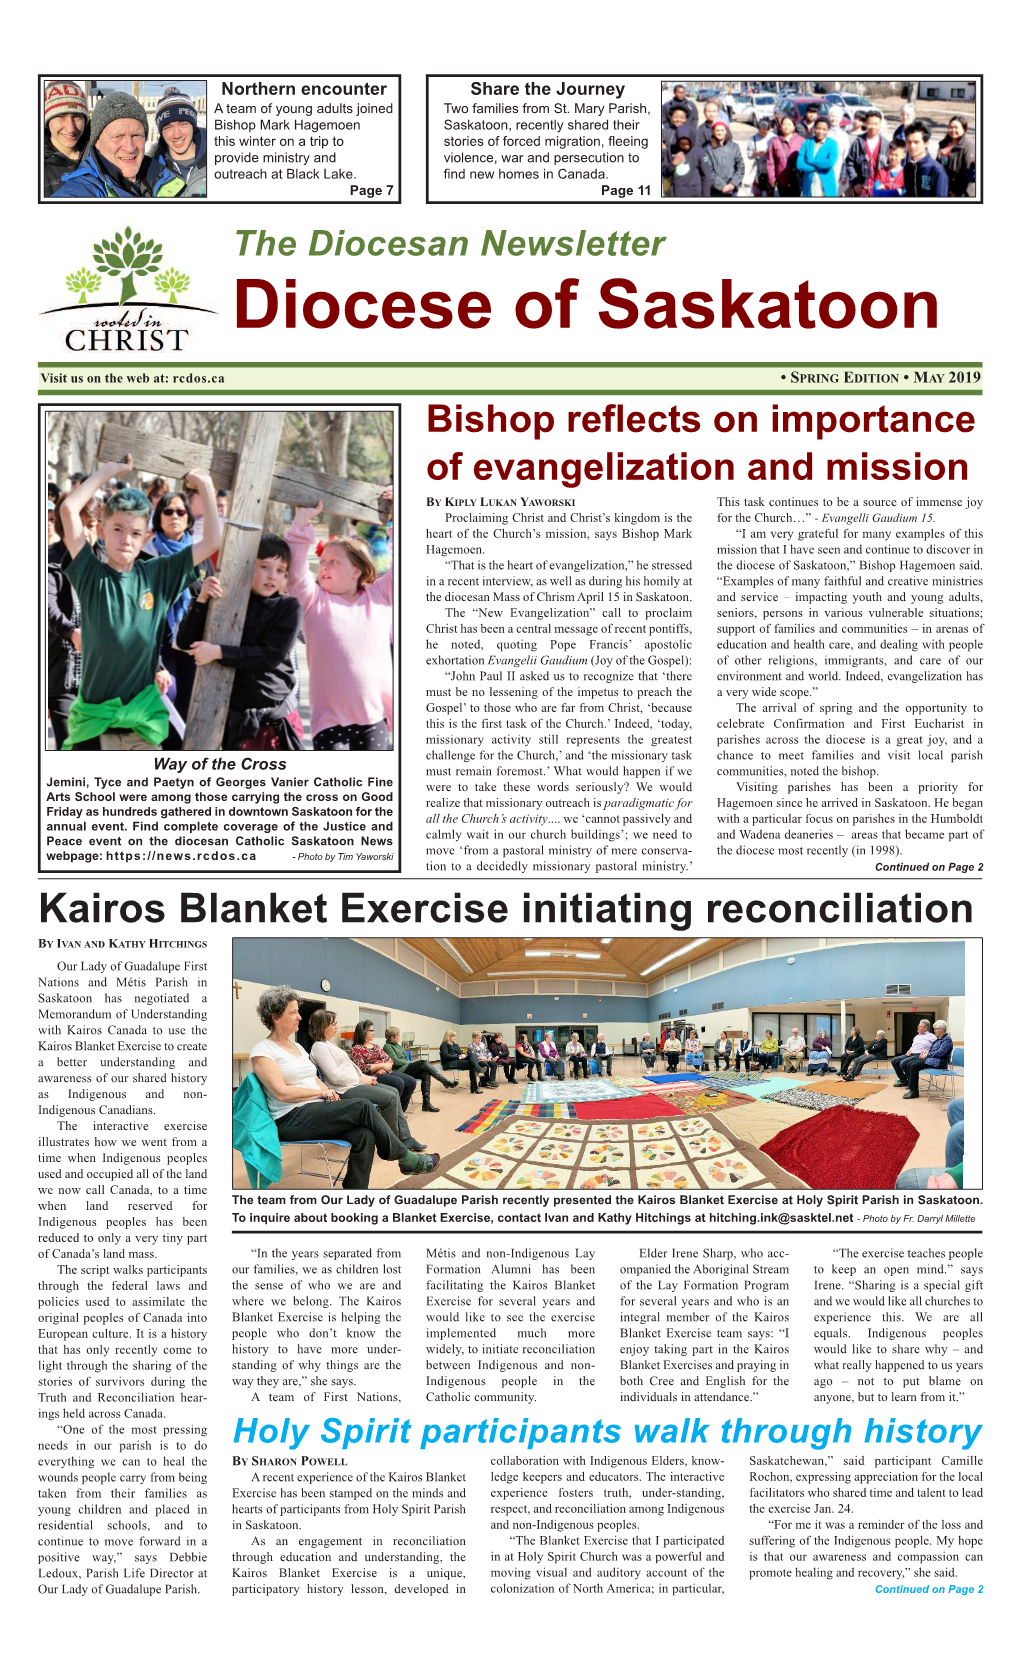 2019 – Spring Edition of the Diocesan Newsletter